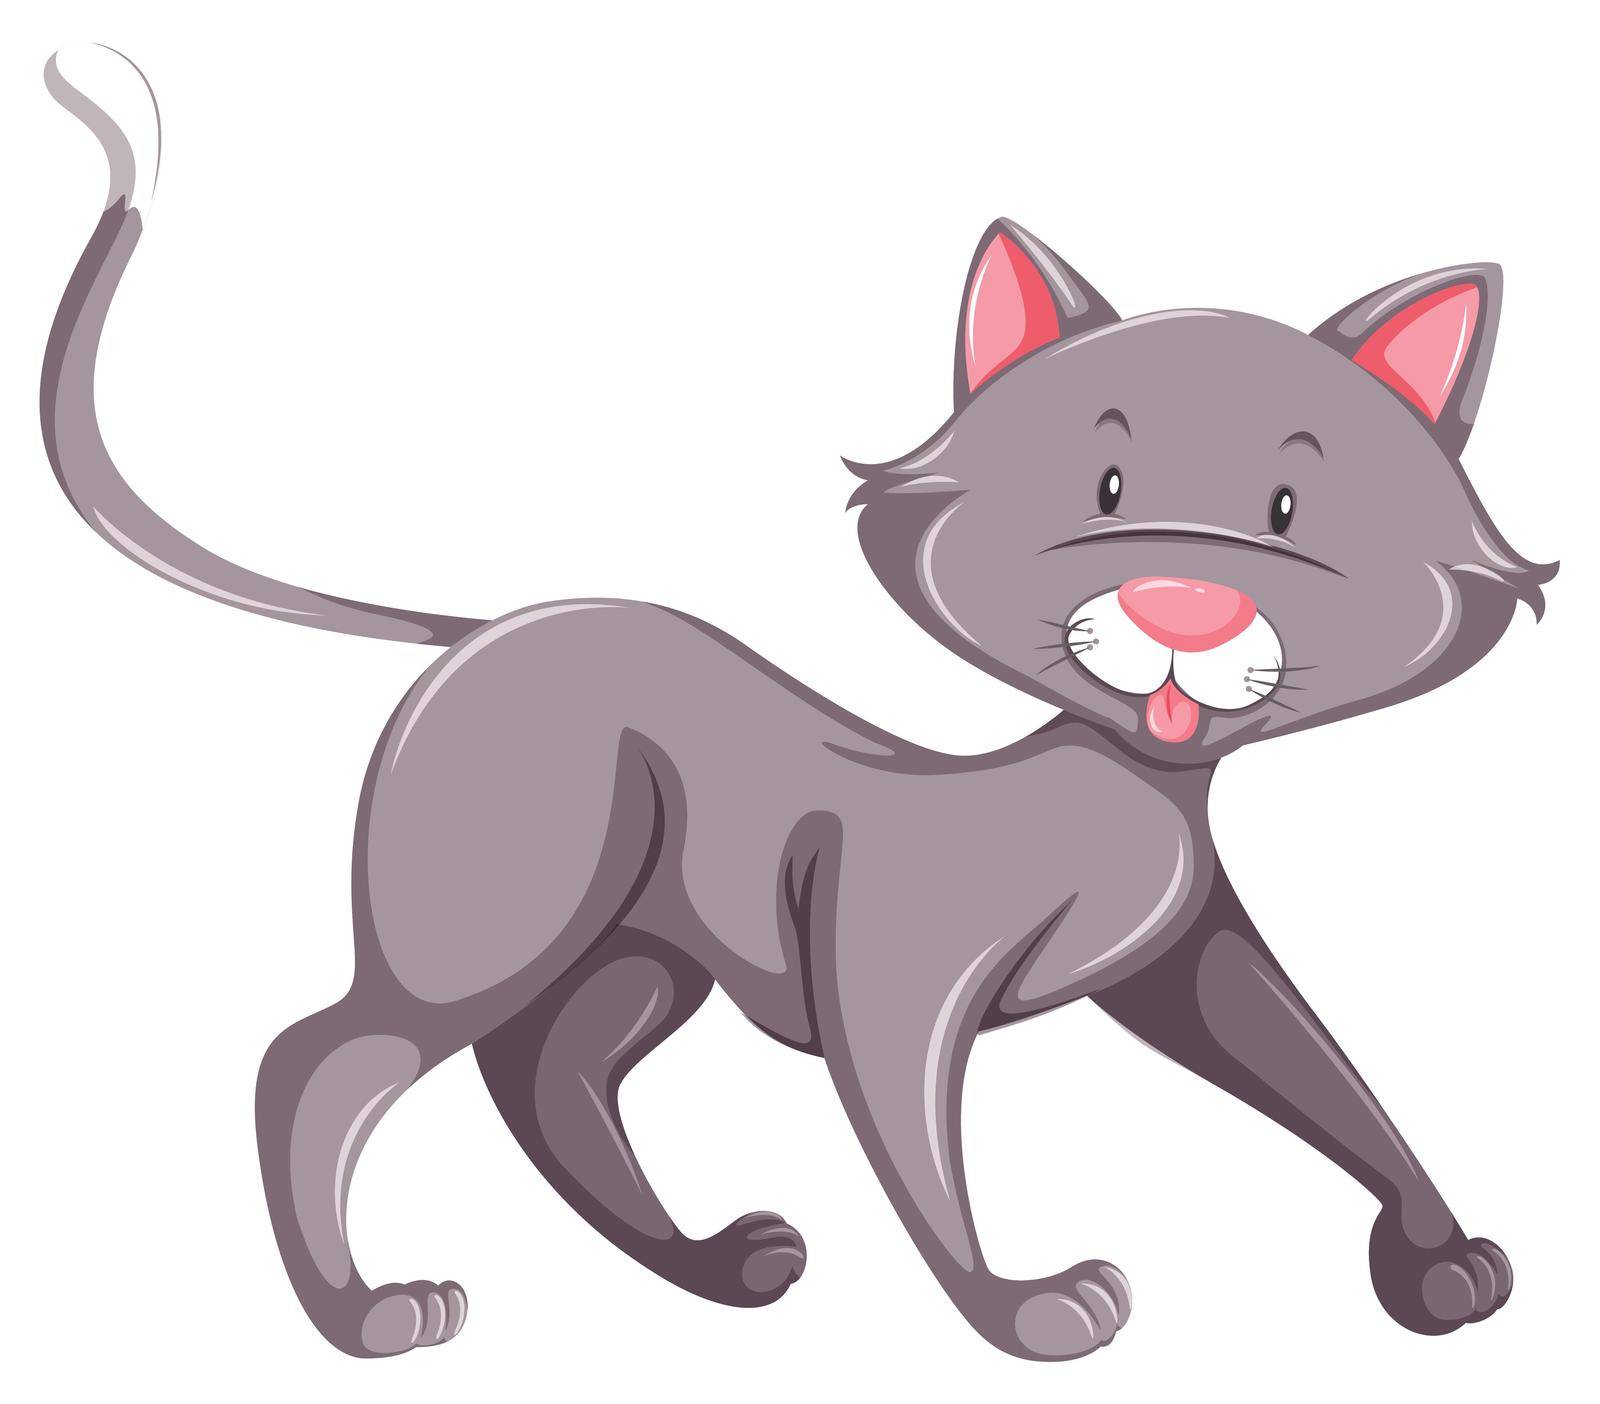 Flashcard of a standing grey cat